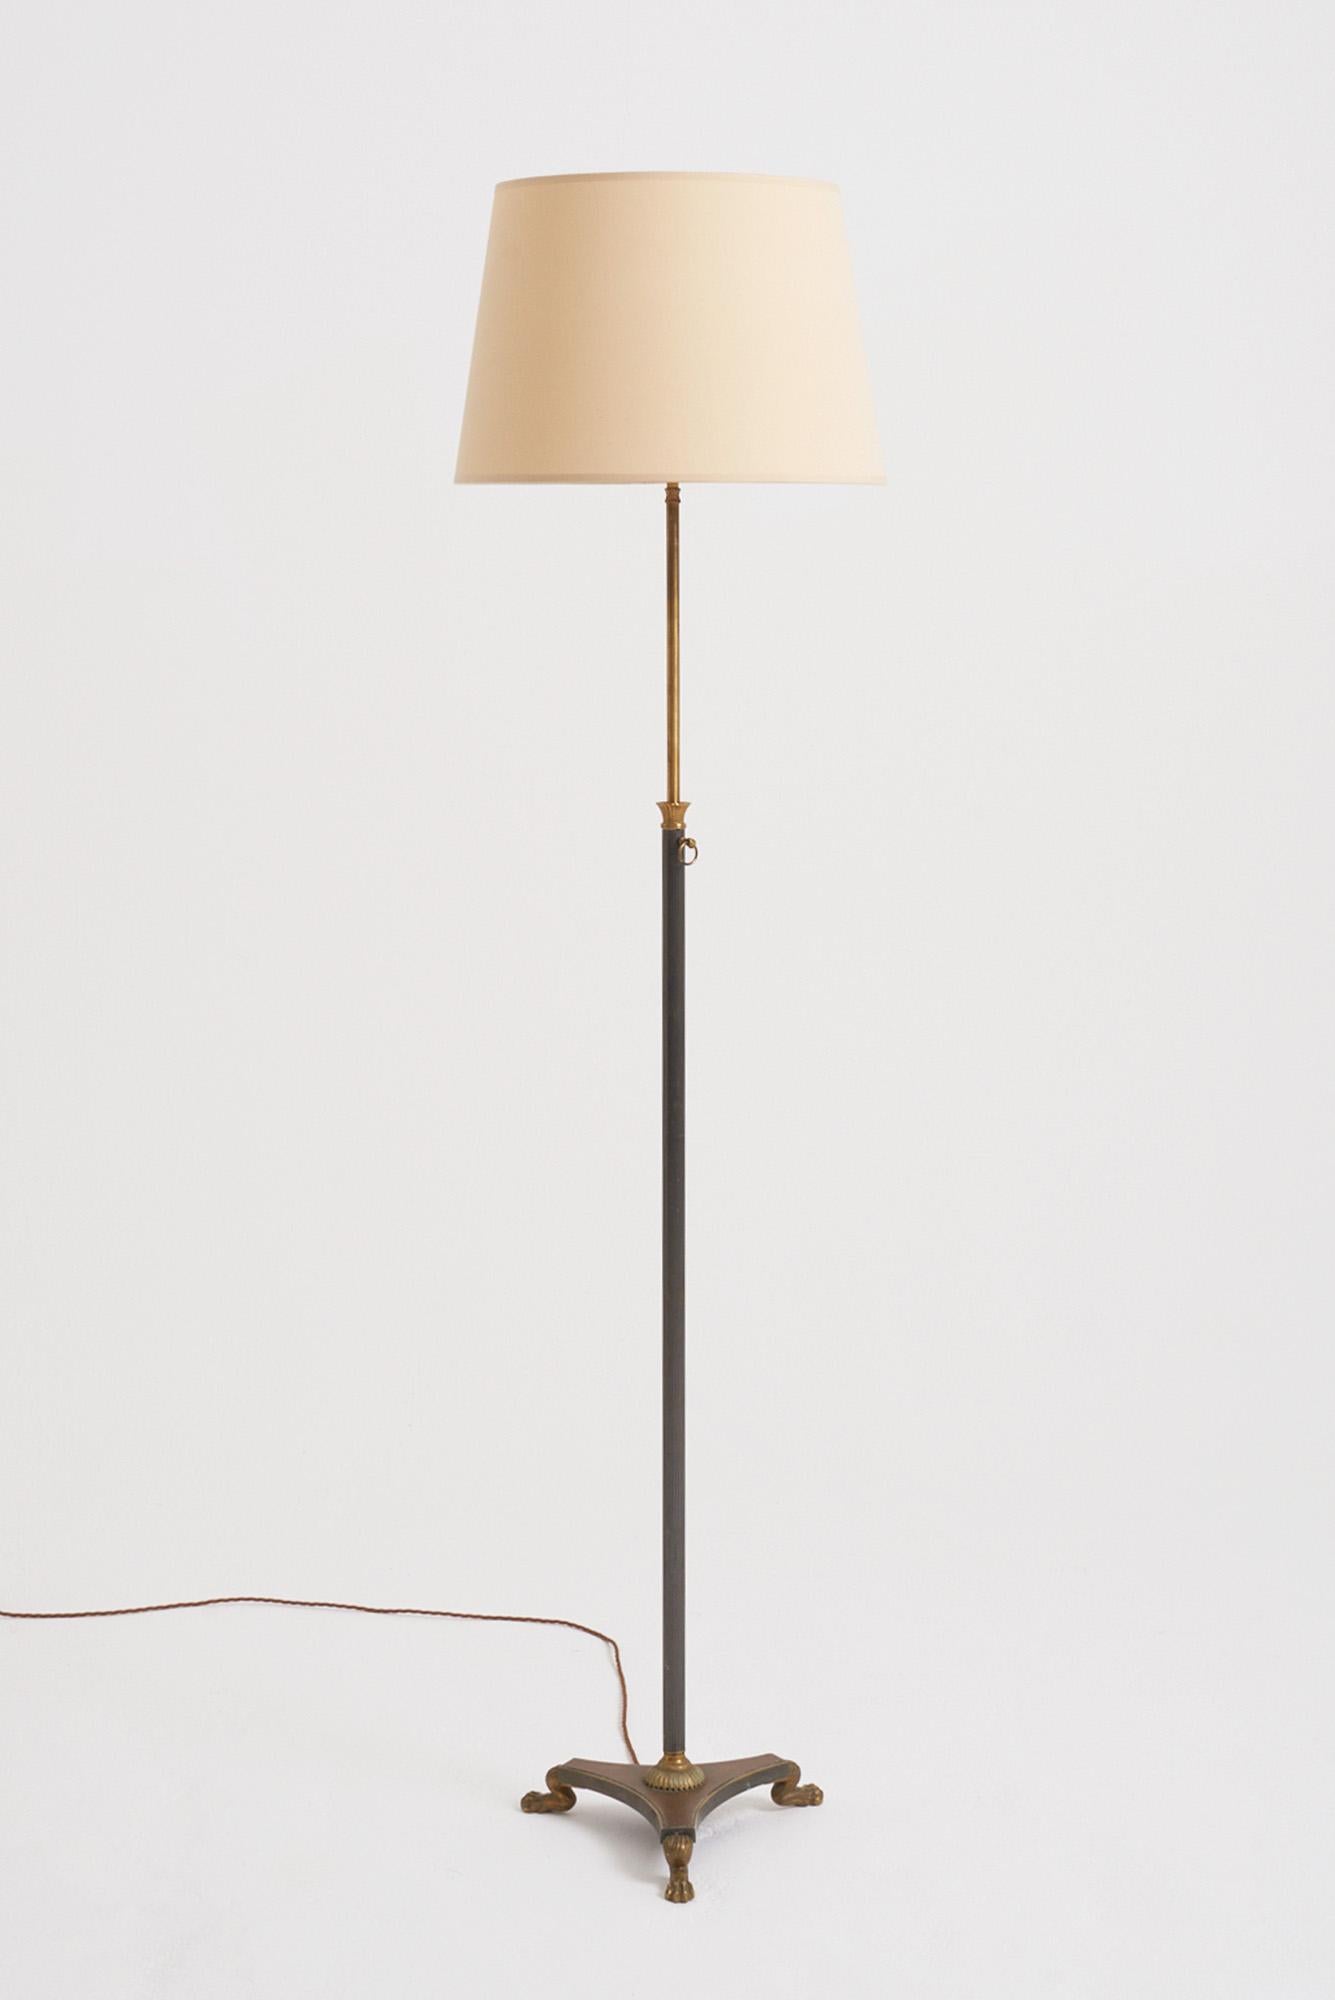 ​A Neoclassical bronze and brass telescopic floor lamp
France, Circa 1940
175 cm tall as shown on the photo, can be lower or shorter, since it's telescopic.
The base 35 cm diameter and the shade diameter is 46 cm.